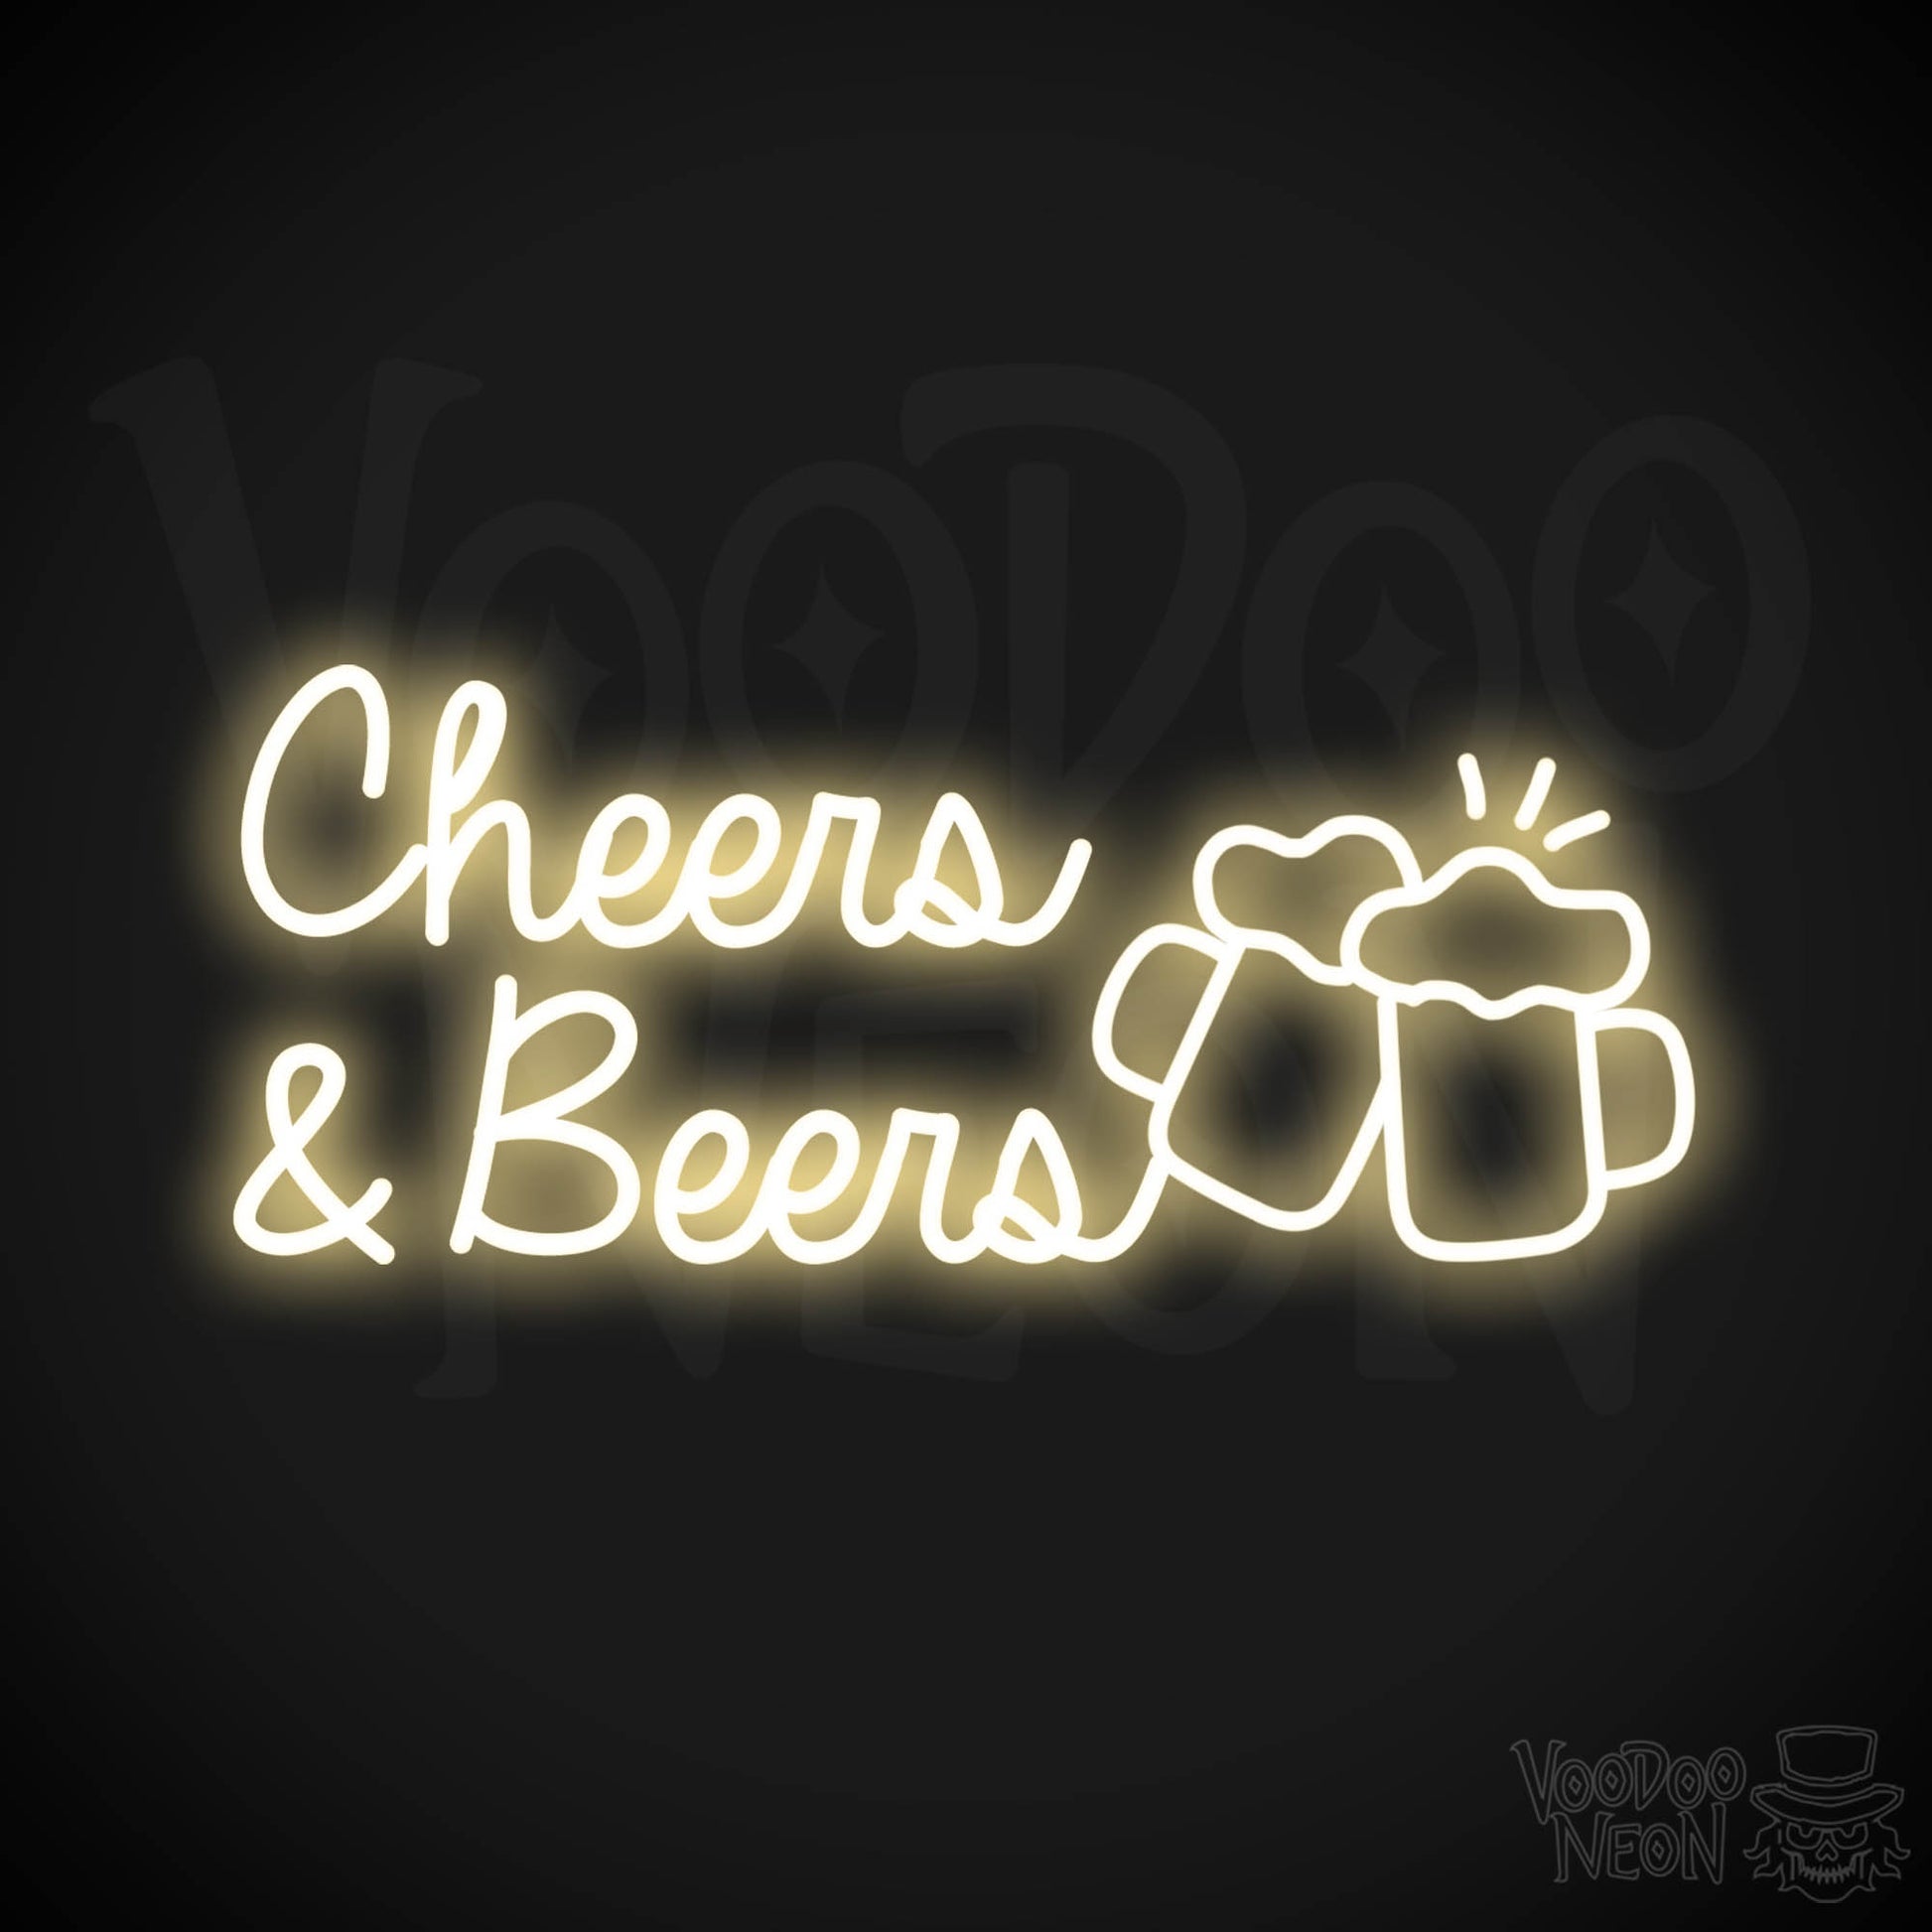 Cheers & Beers LED Neon - Warm White